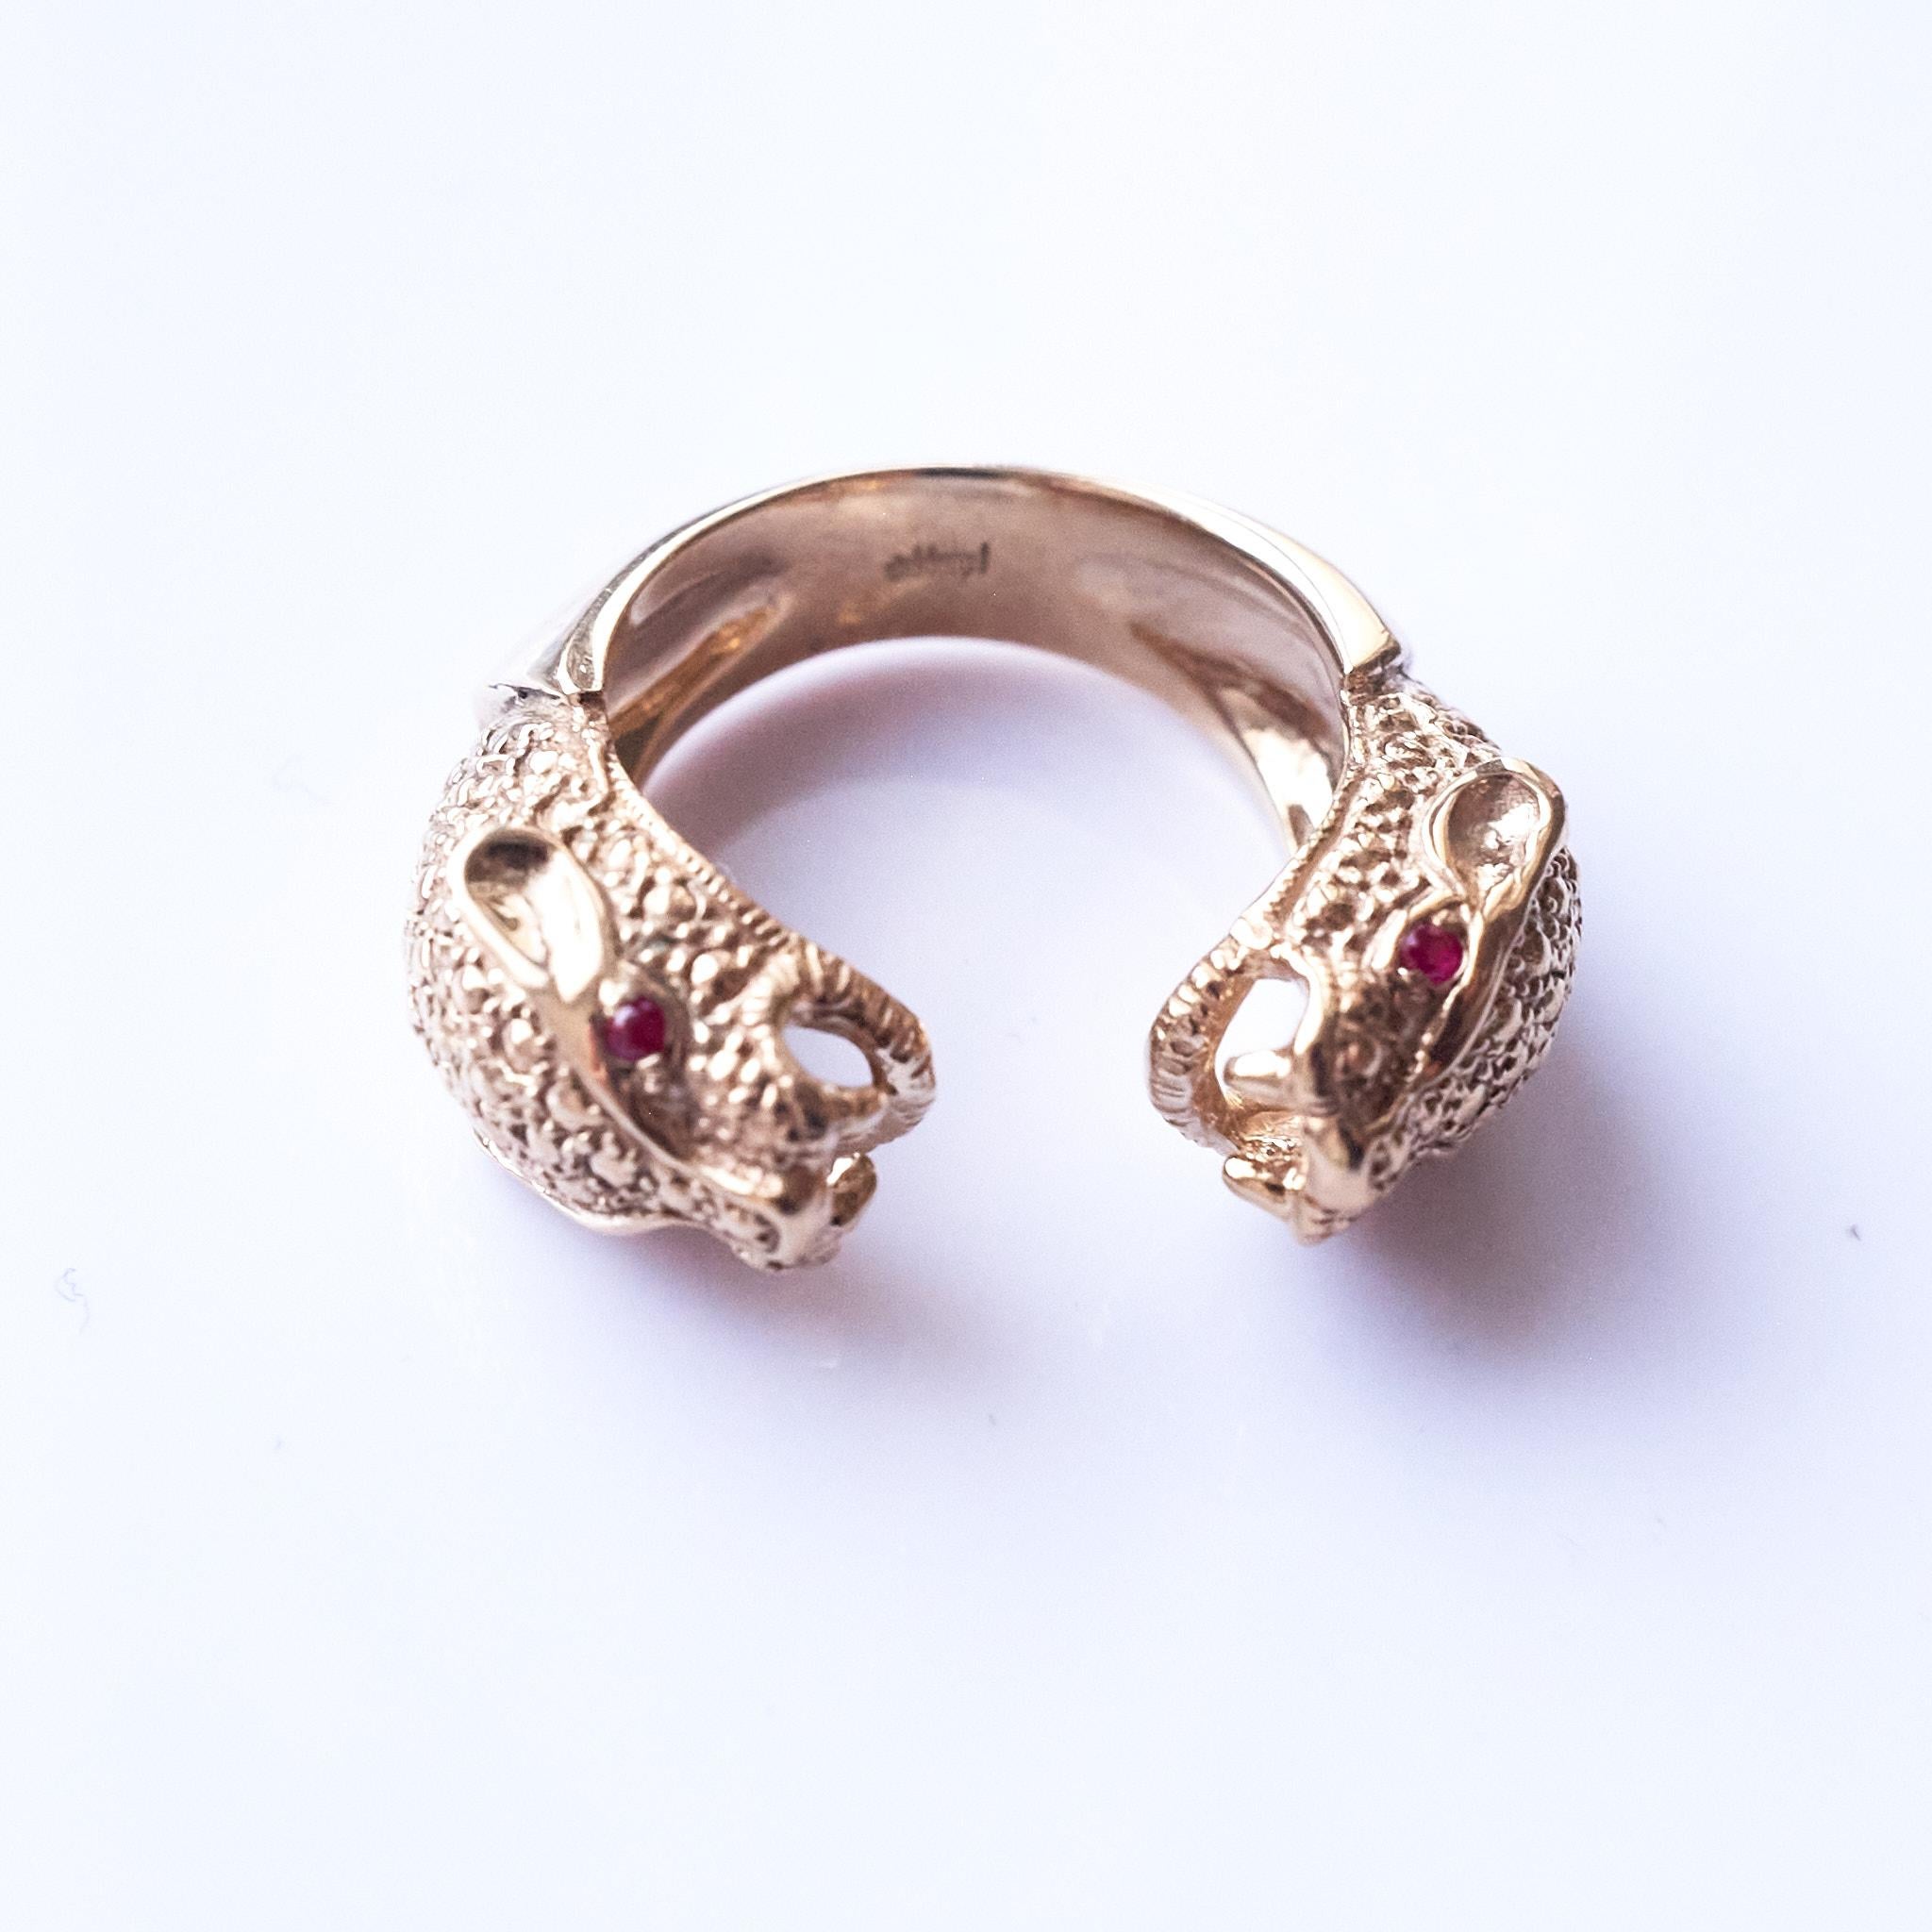 Early Victorian Ruby Jaguar Ring Bronze Animal Jewelry Cocktail Ring J Dauphin For Sale